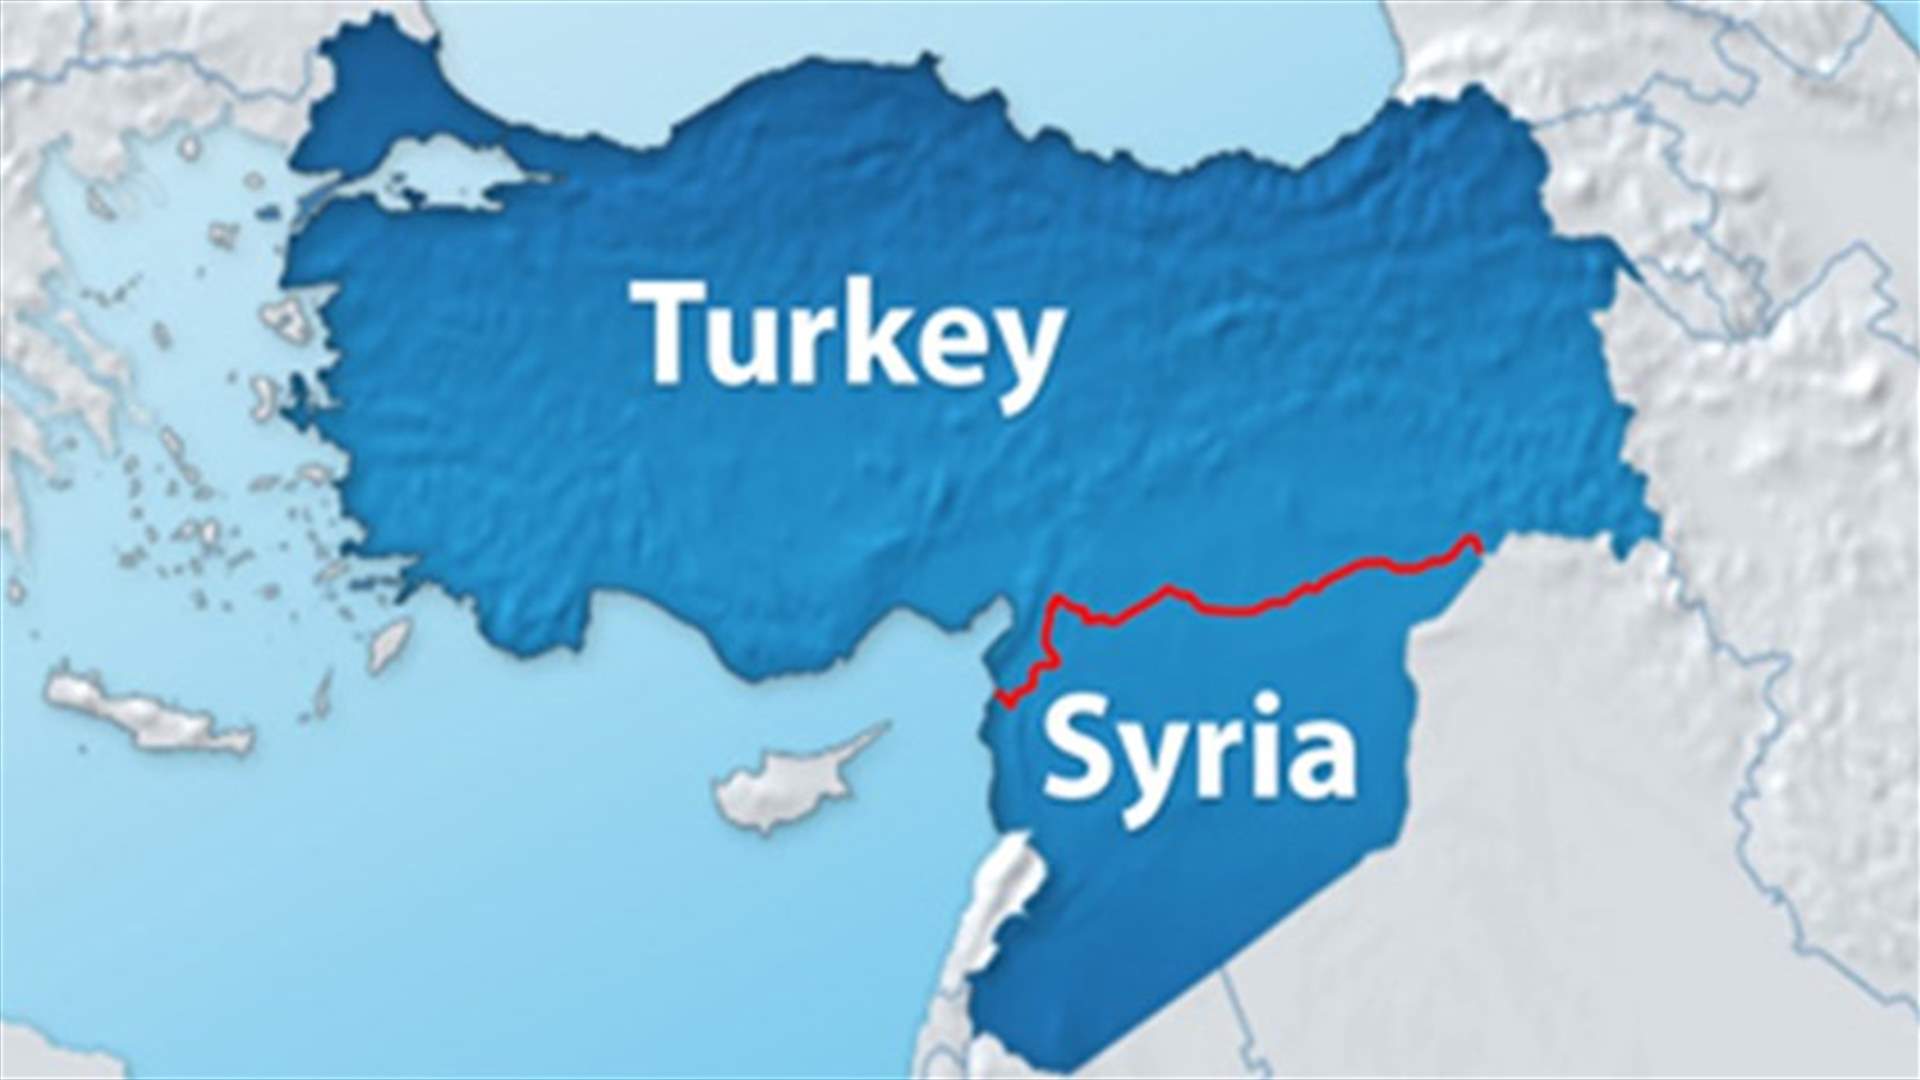 One wounded in Turkey as rocket hits house near Syria border - media